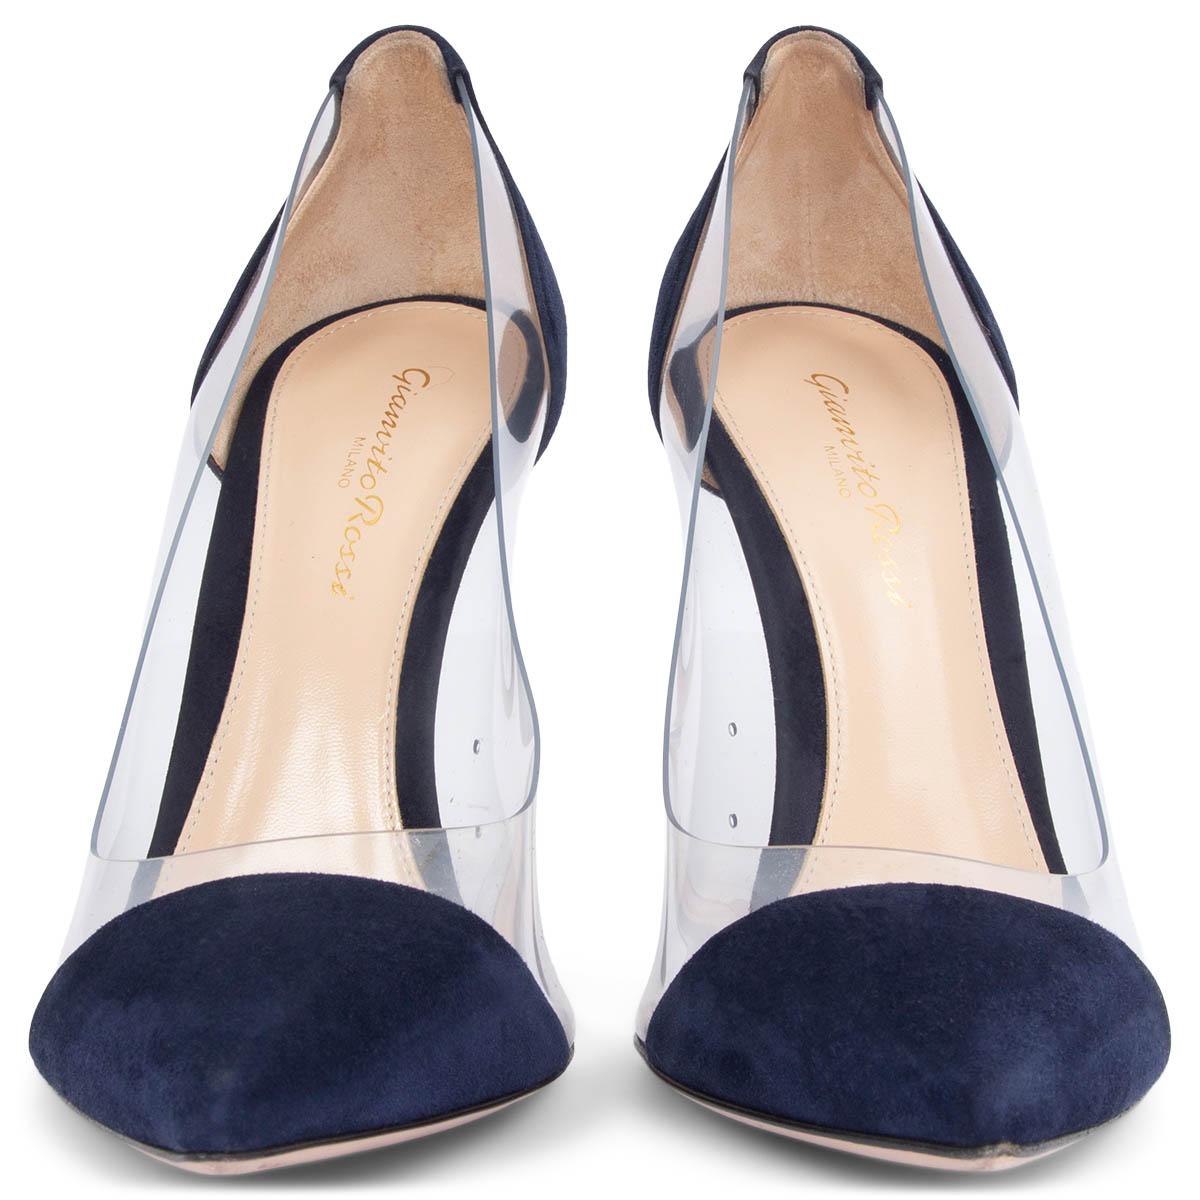 100% authentic Gianvito Rossi Plexi 105 pumps in navy suede and clear vinyl. Have been worn and are in excellent condition. 

Measurements
Imprinted Size	37
Shoe Size	37
Inside Sole	24cm (9.4in)
Width	7cm (2.7in)
Heel	10.5cm (4.1in)

All our